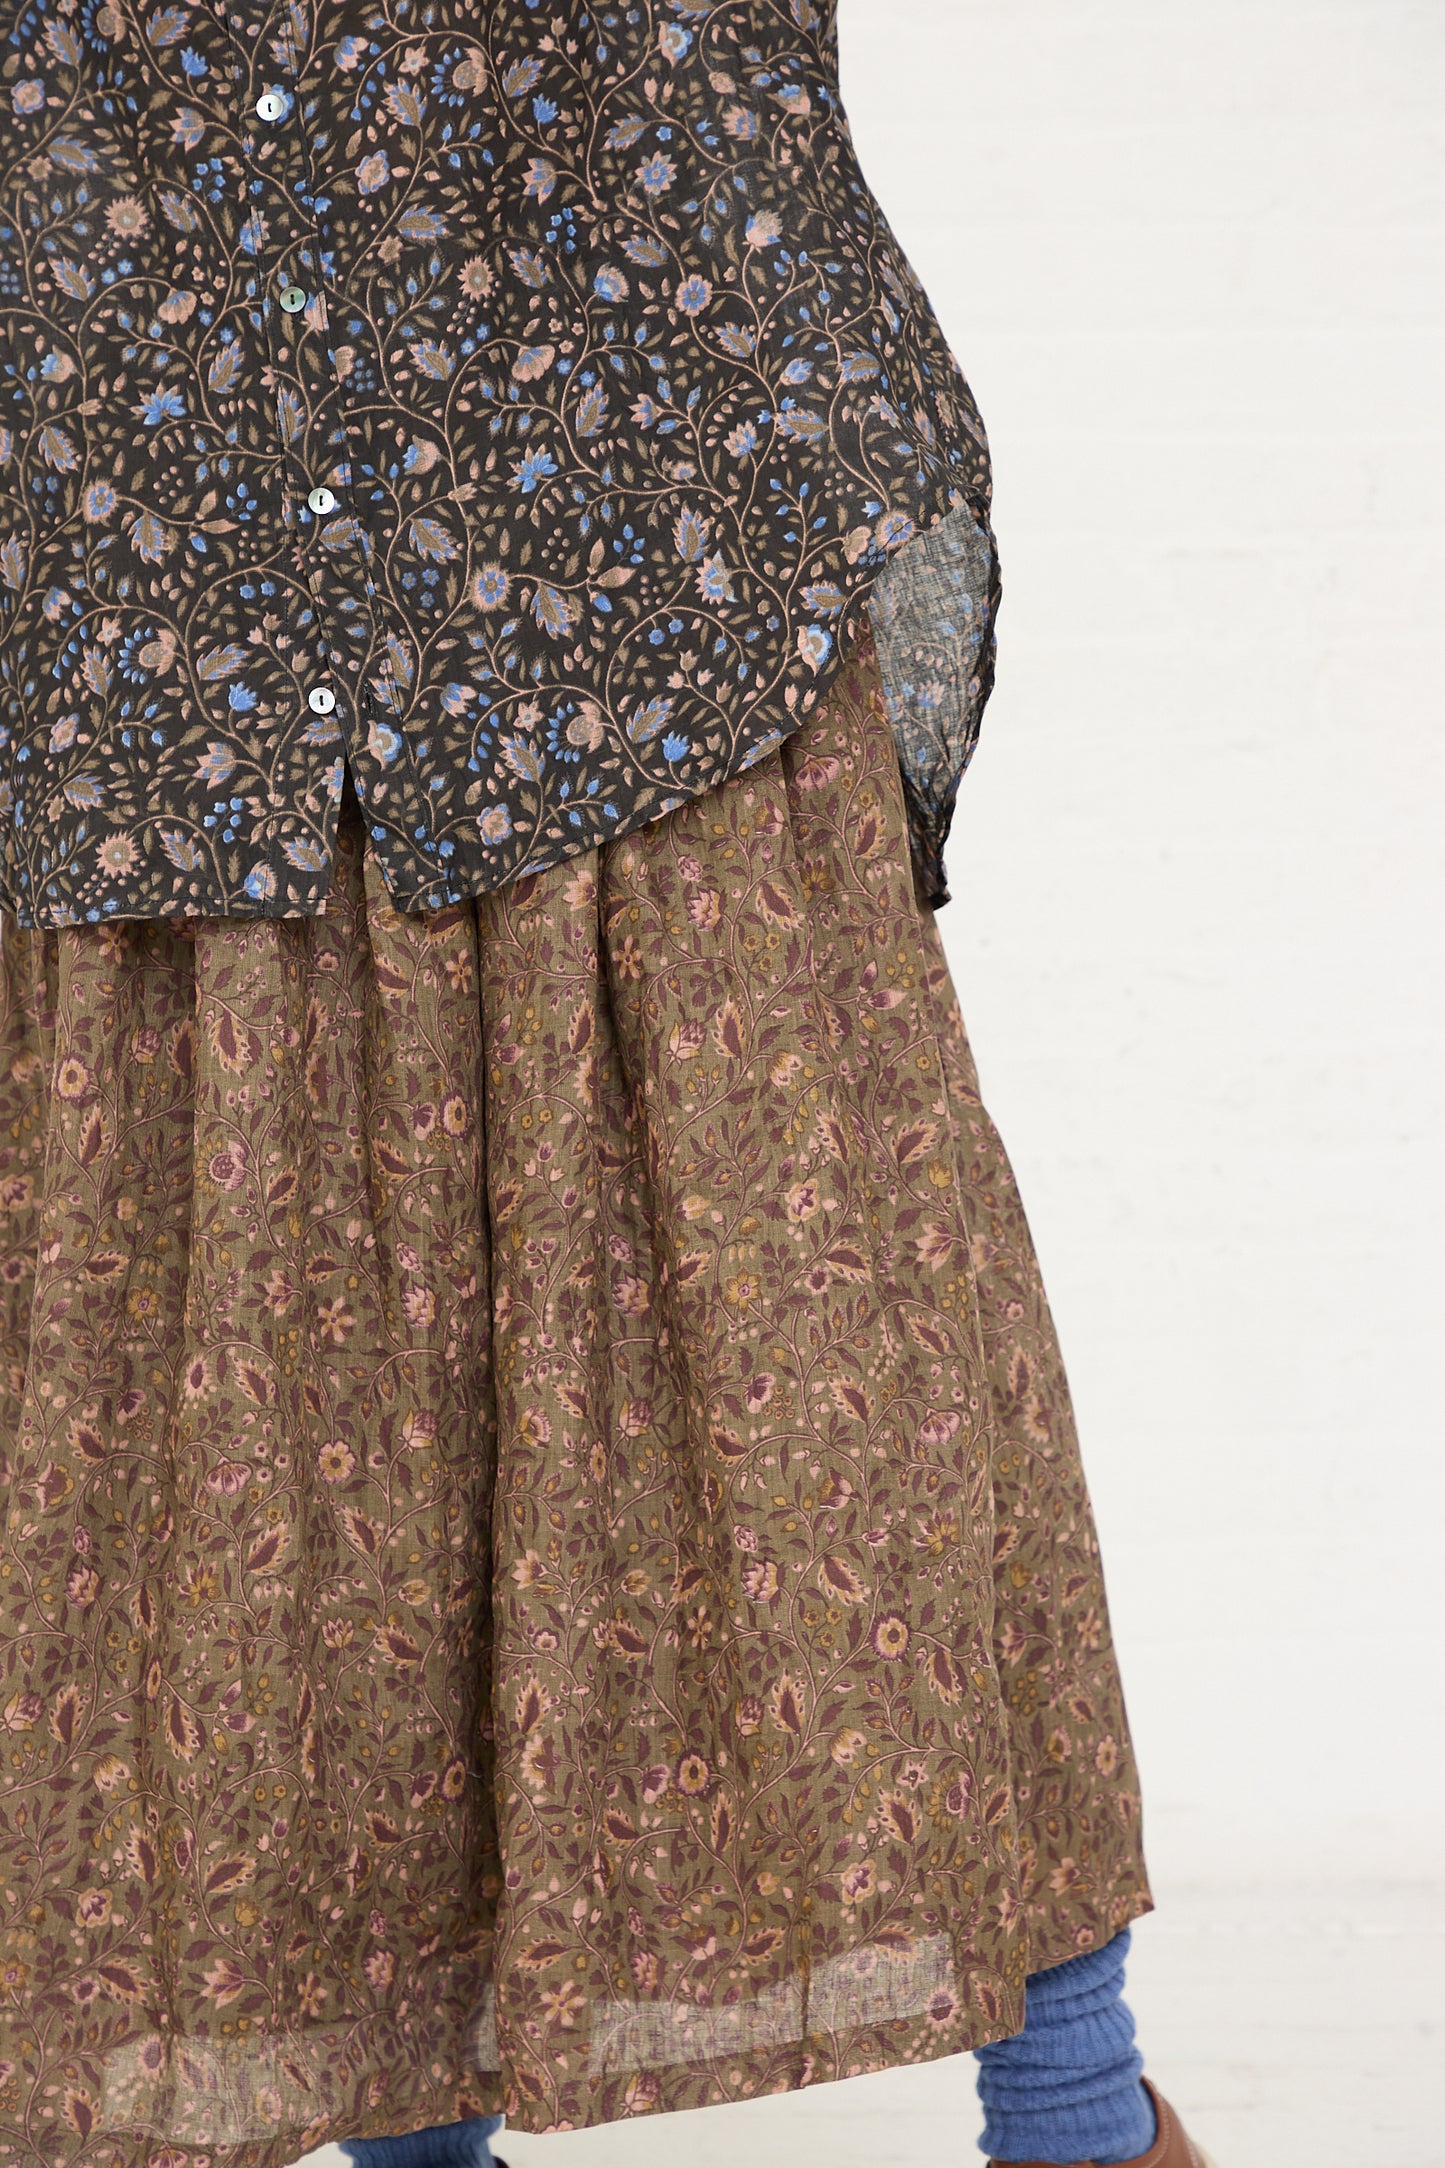 Partial view of a person wearing a Linen Floral Shirt in Black by Ichi Antiquités and a patterned skirt with a glimpse of blue socks.